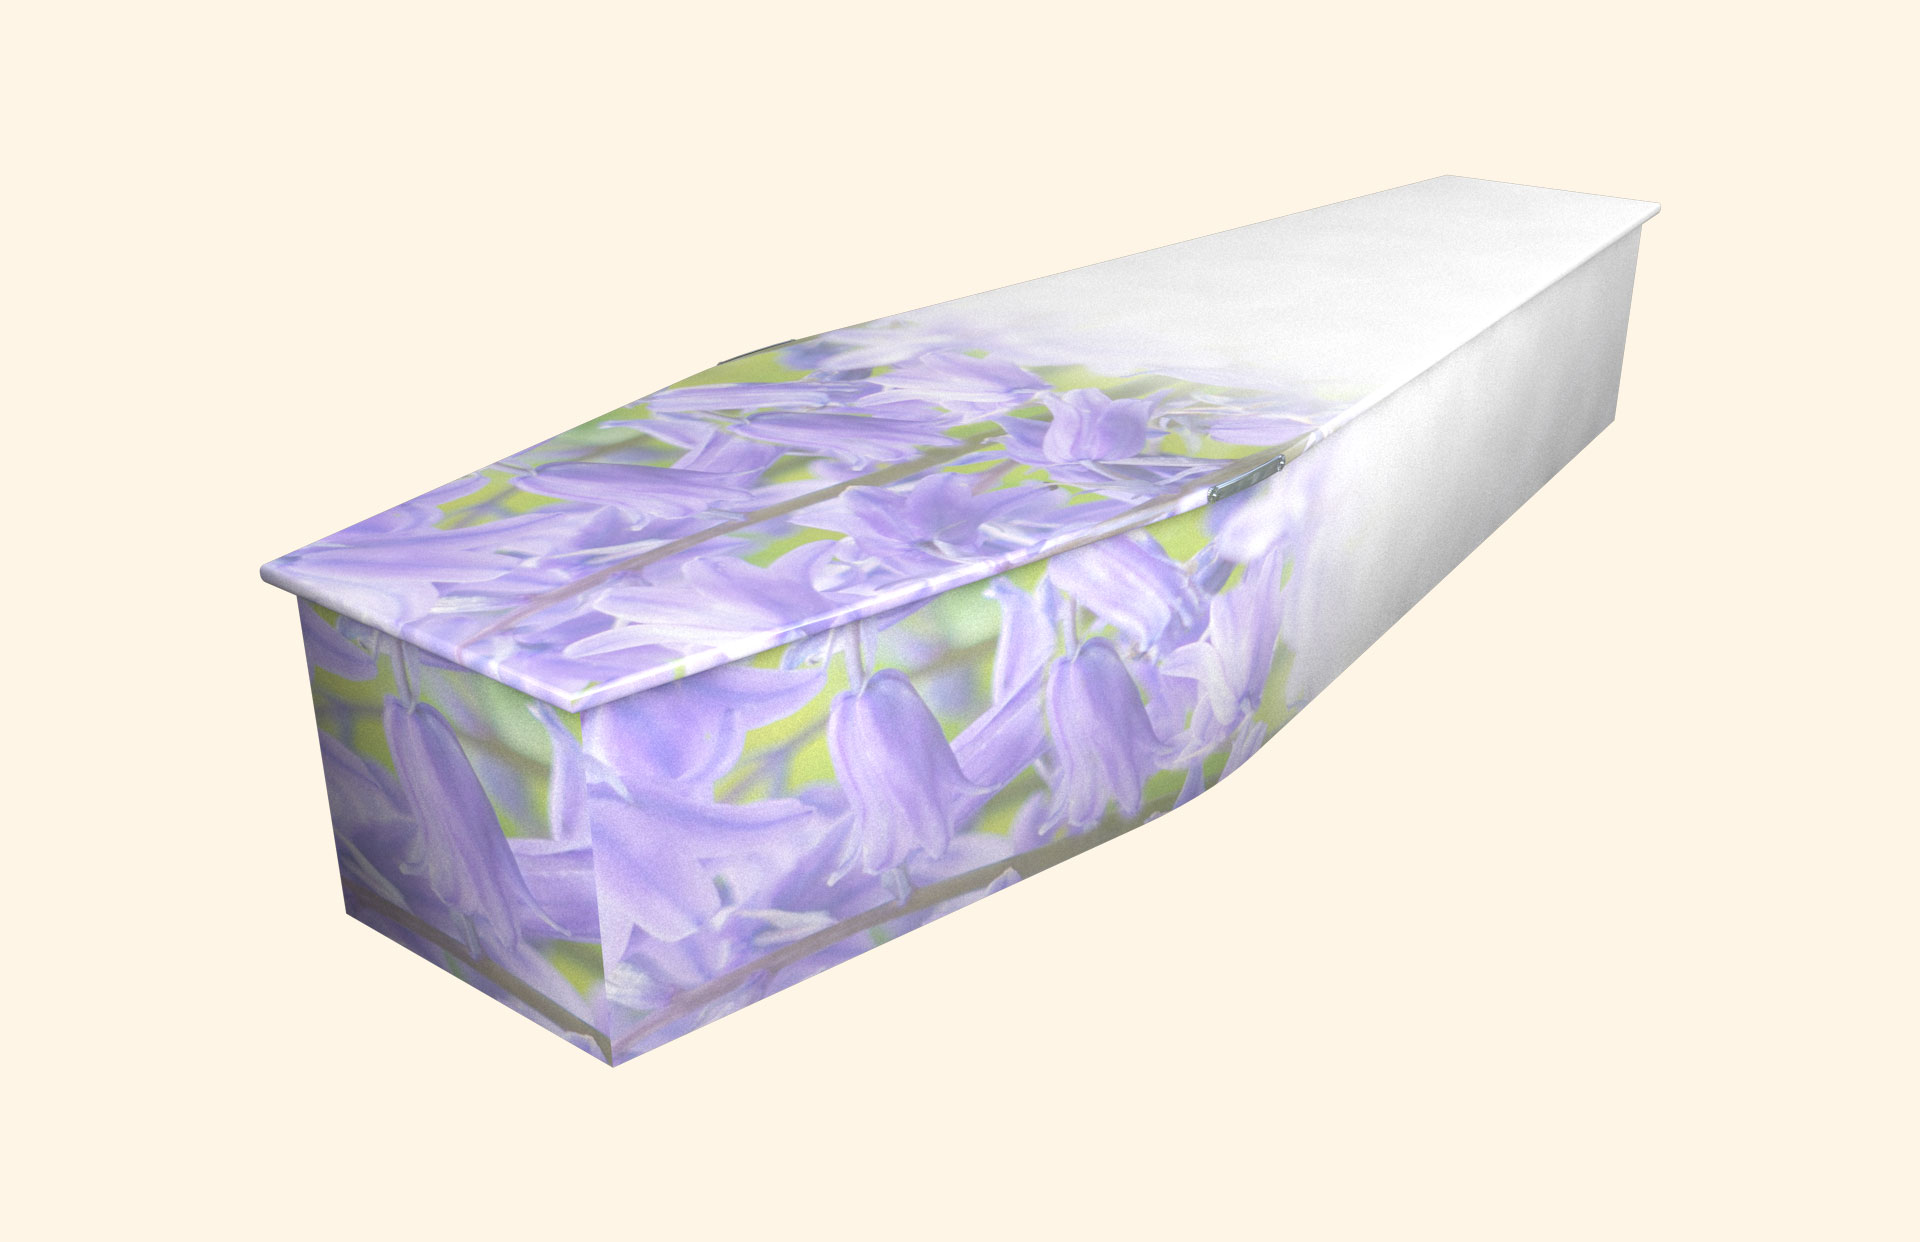 Blushing Bluebells design on a traditional coffin